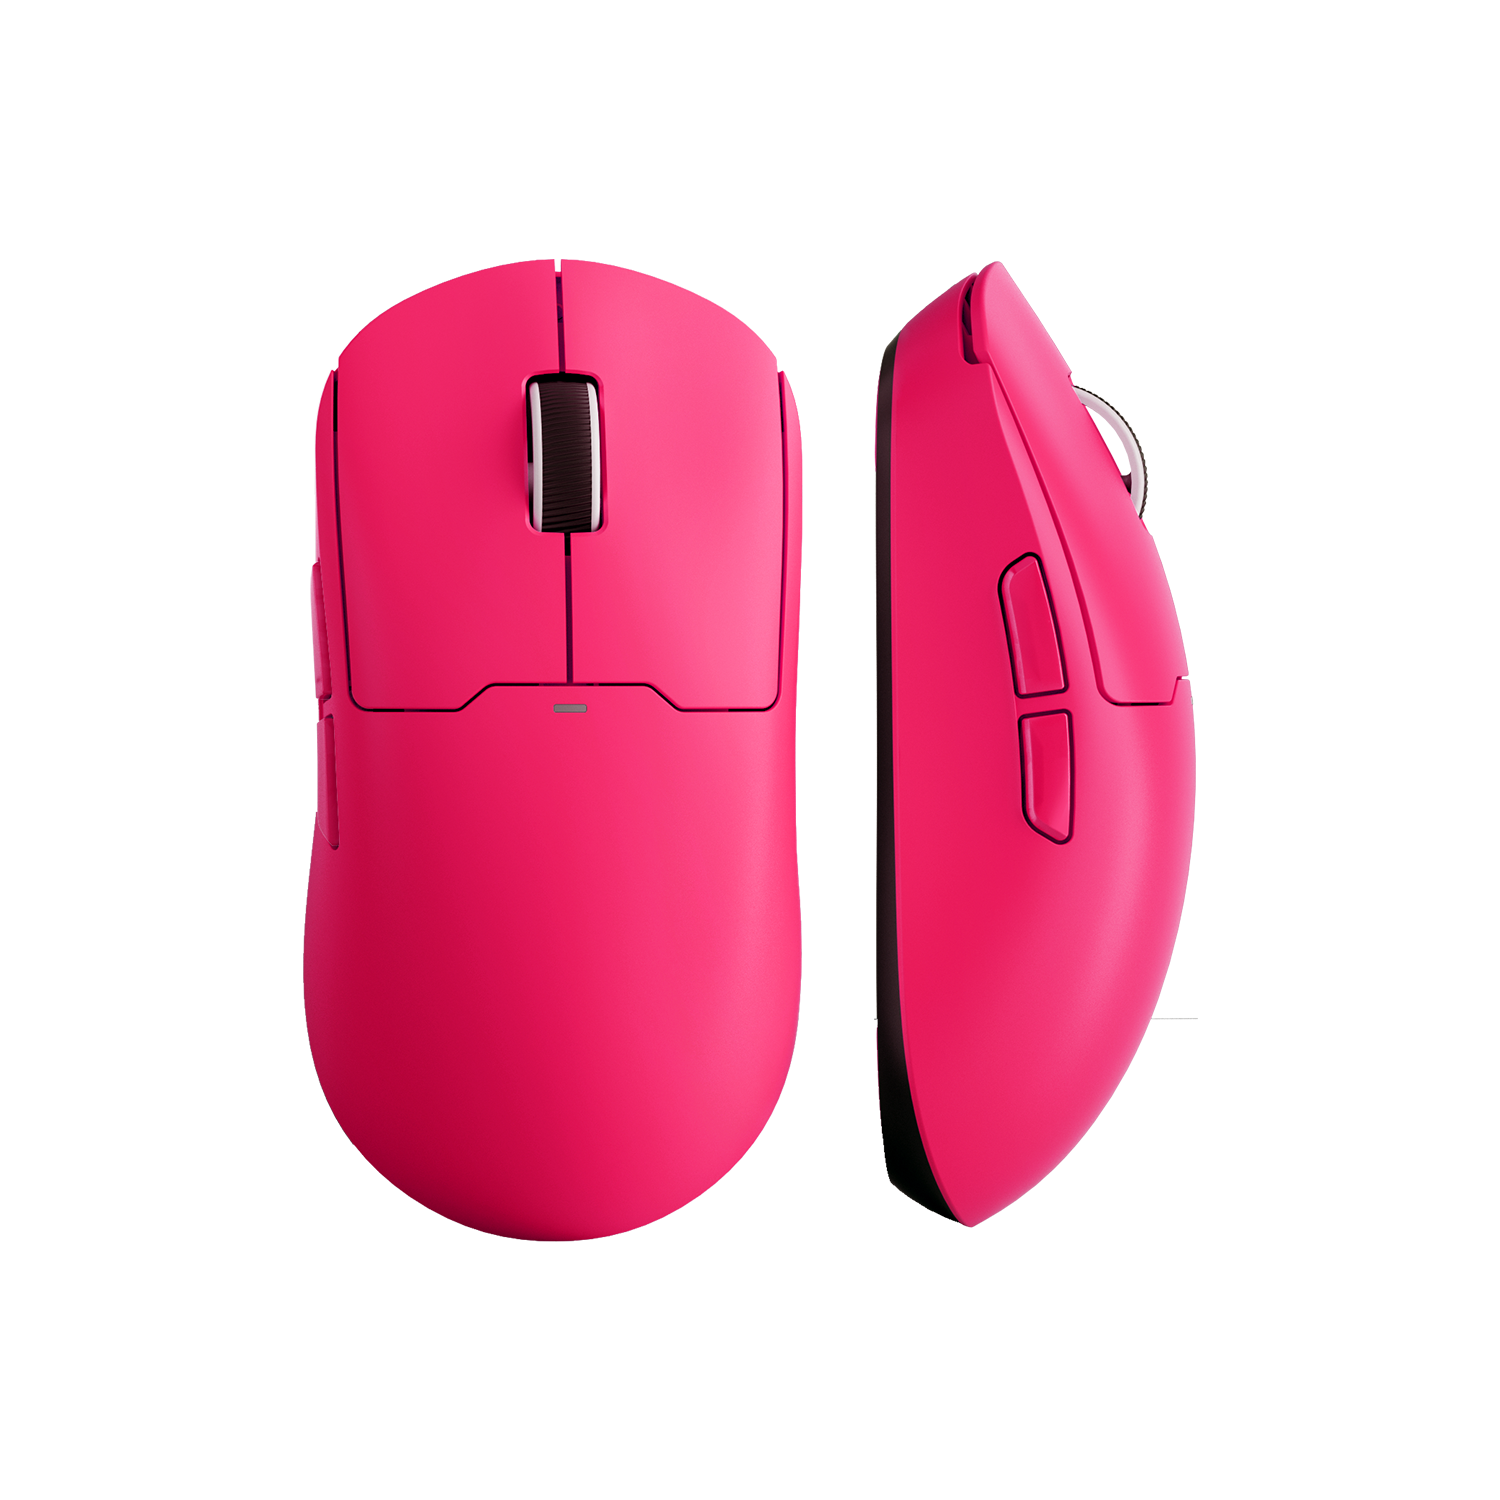 MCHOSE A5 Series Wireless Mouse – MCHOSE Official